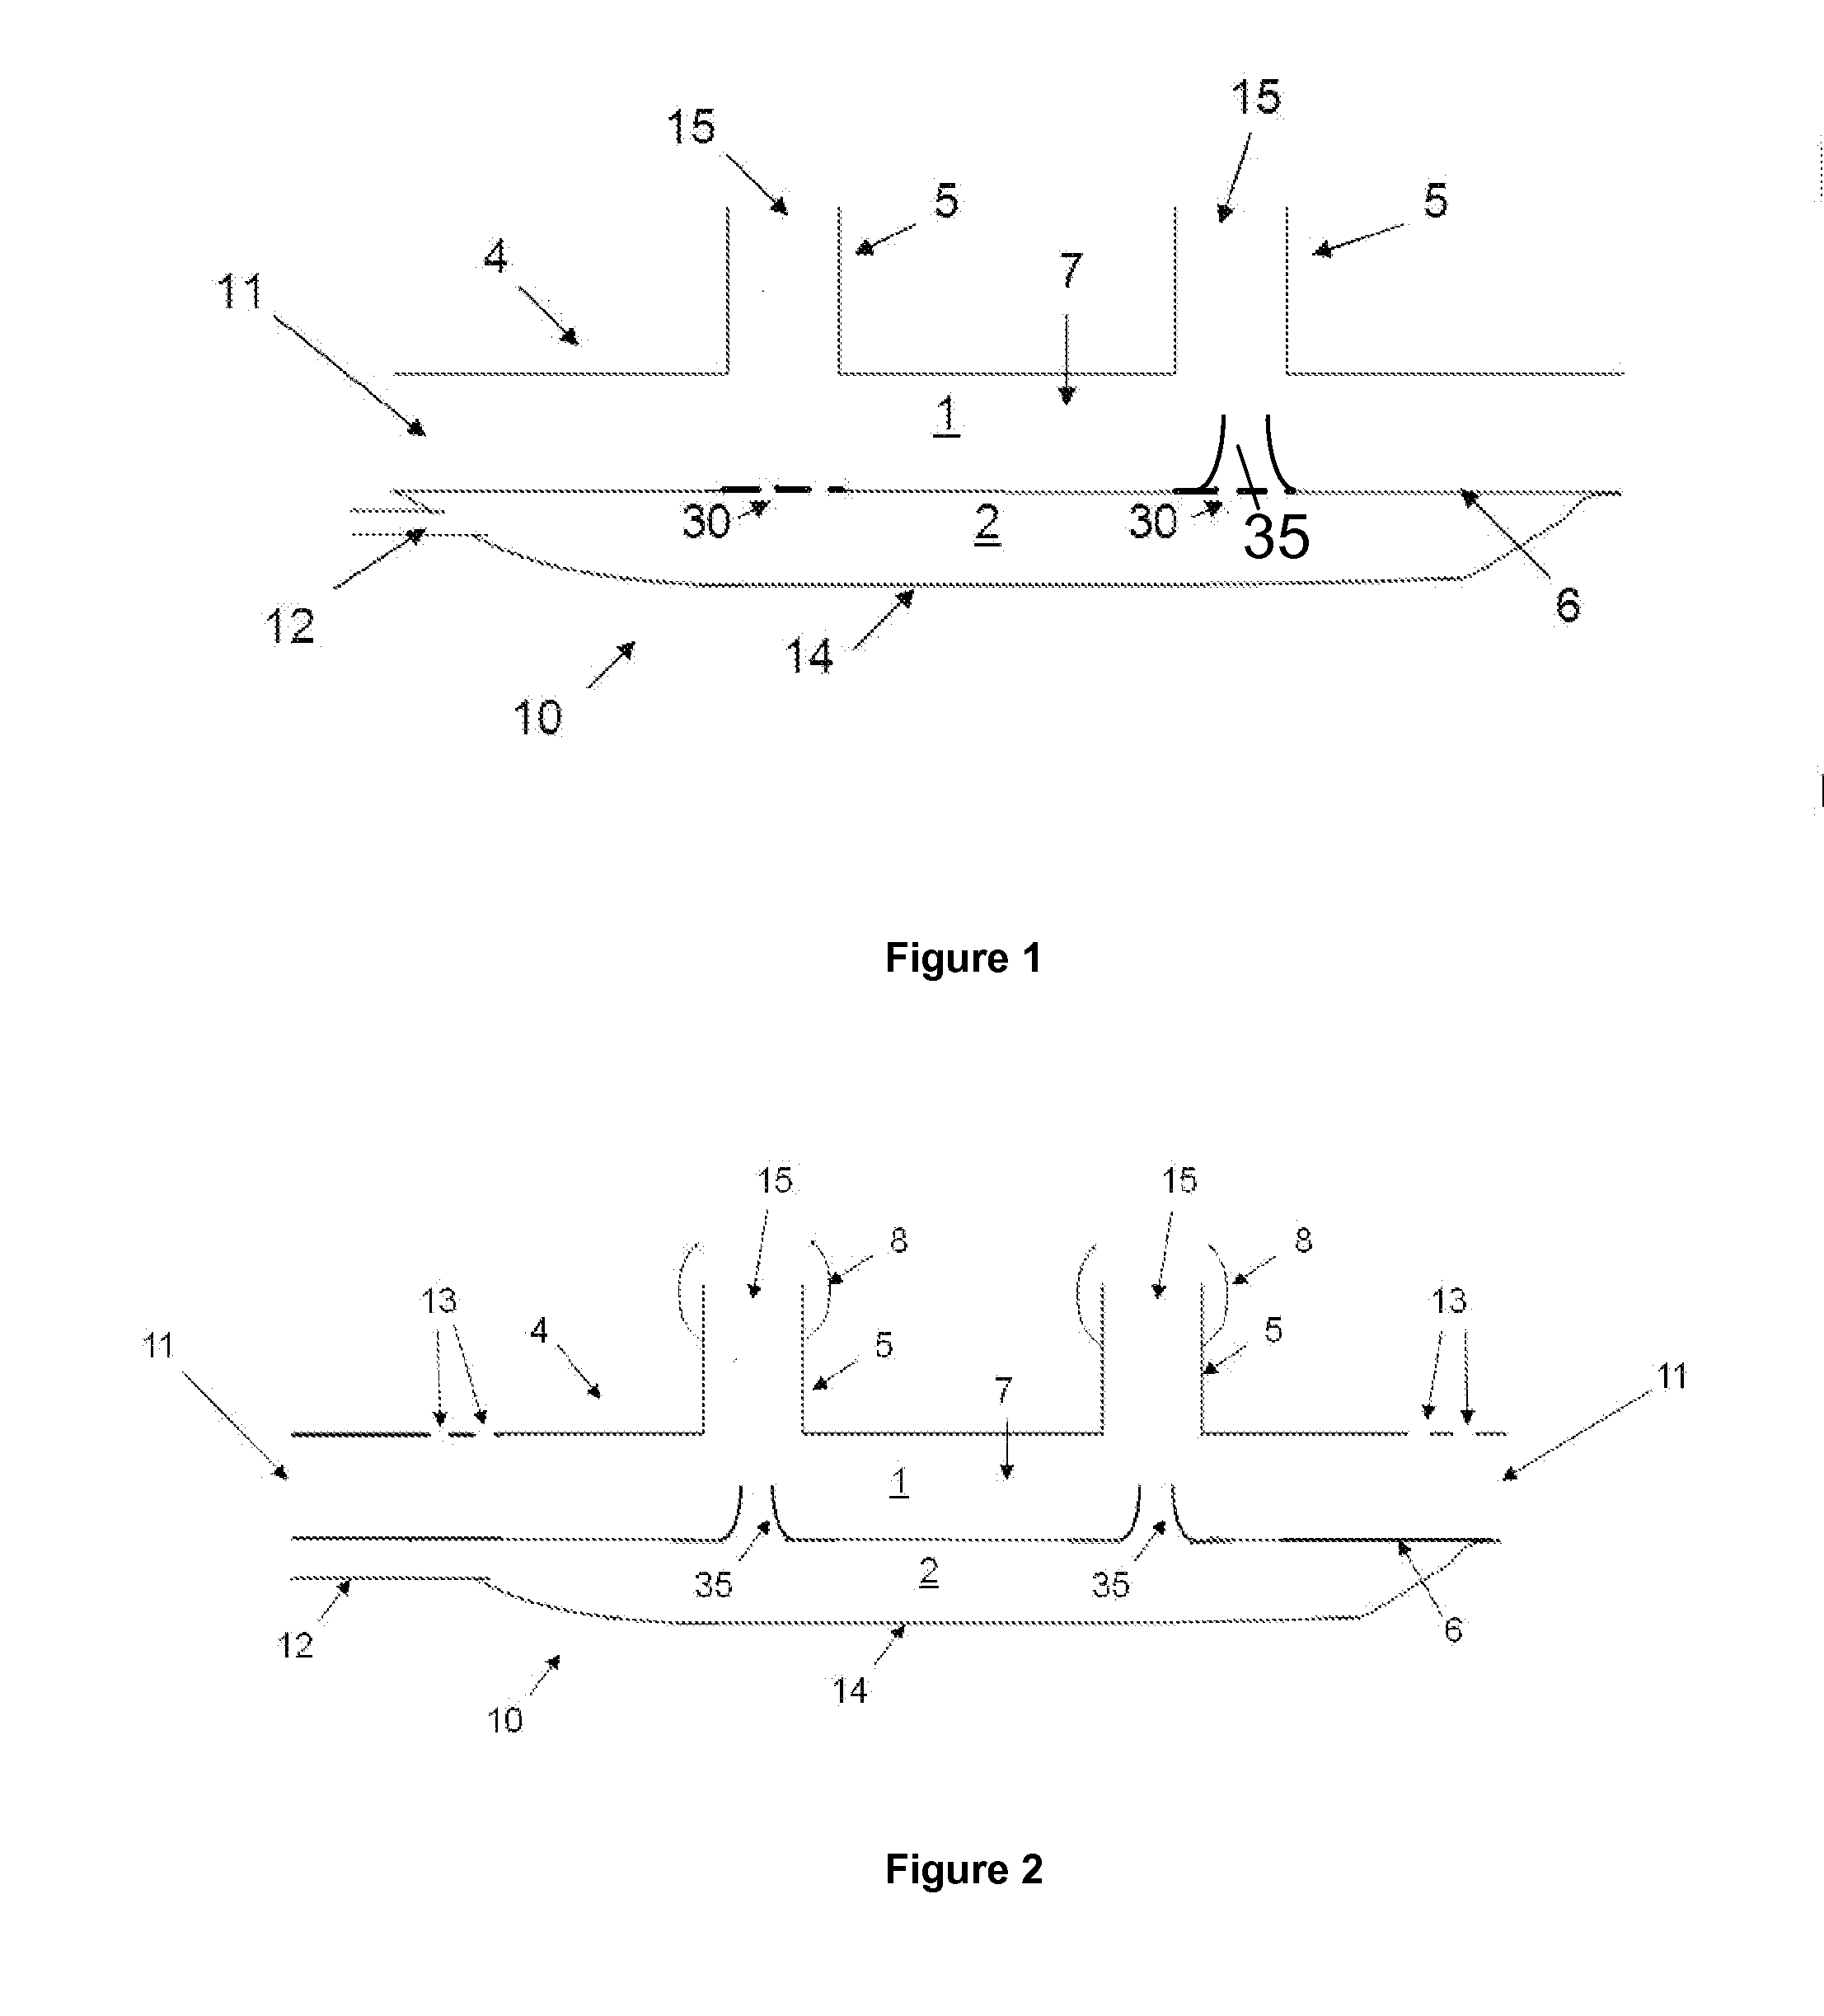 Breathing assistance apparatus for delivery of nitric oxide to a patient by means of a nasal cannula assembly with flow control passage